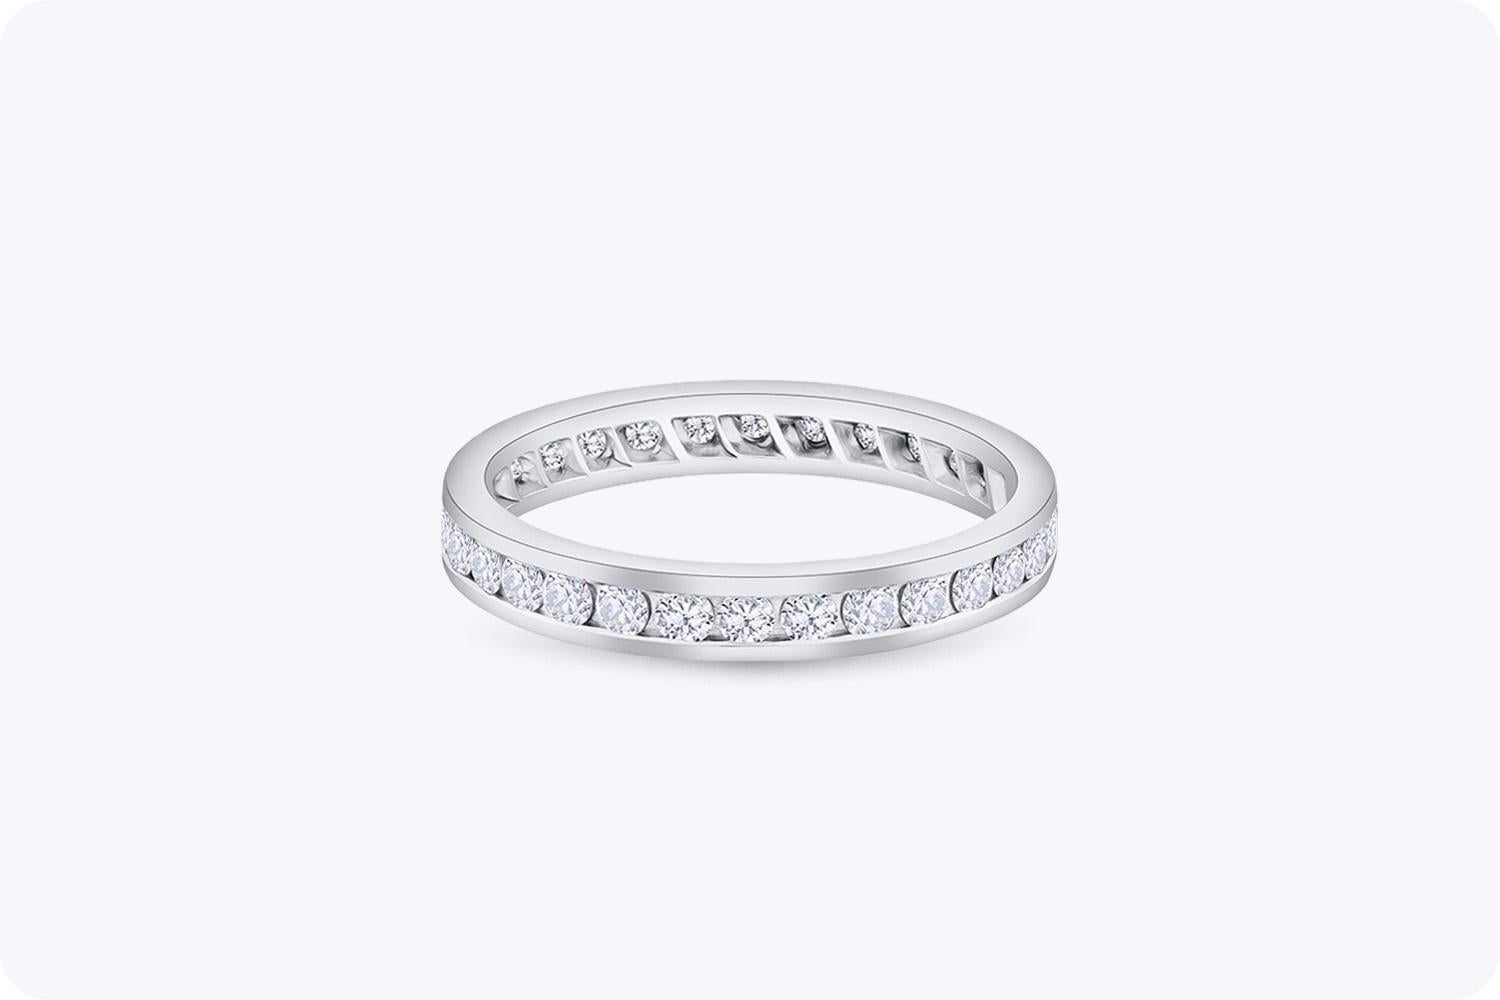 A classic and chic wedding band showcasing 30 sparkling round diamonds weighing 0.98 carats total. The diamonds are channel set in 18k white gold that makes it perfect for stacking with a gorgeous engagement ring. Size 7.5 US.

Roman Malakov is a